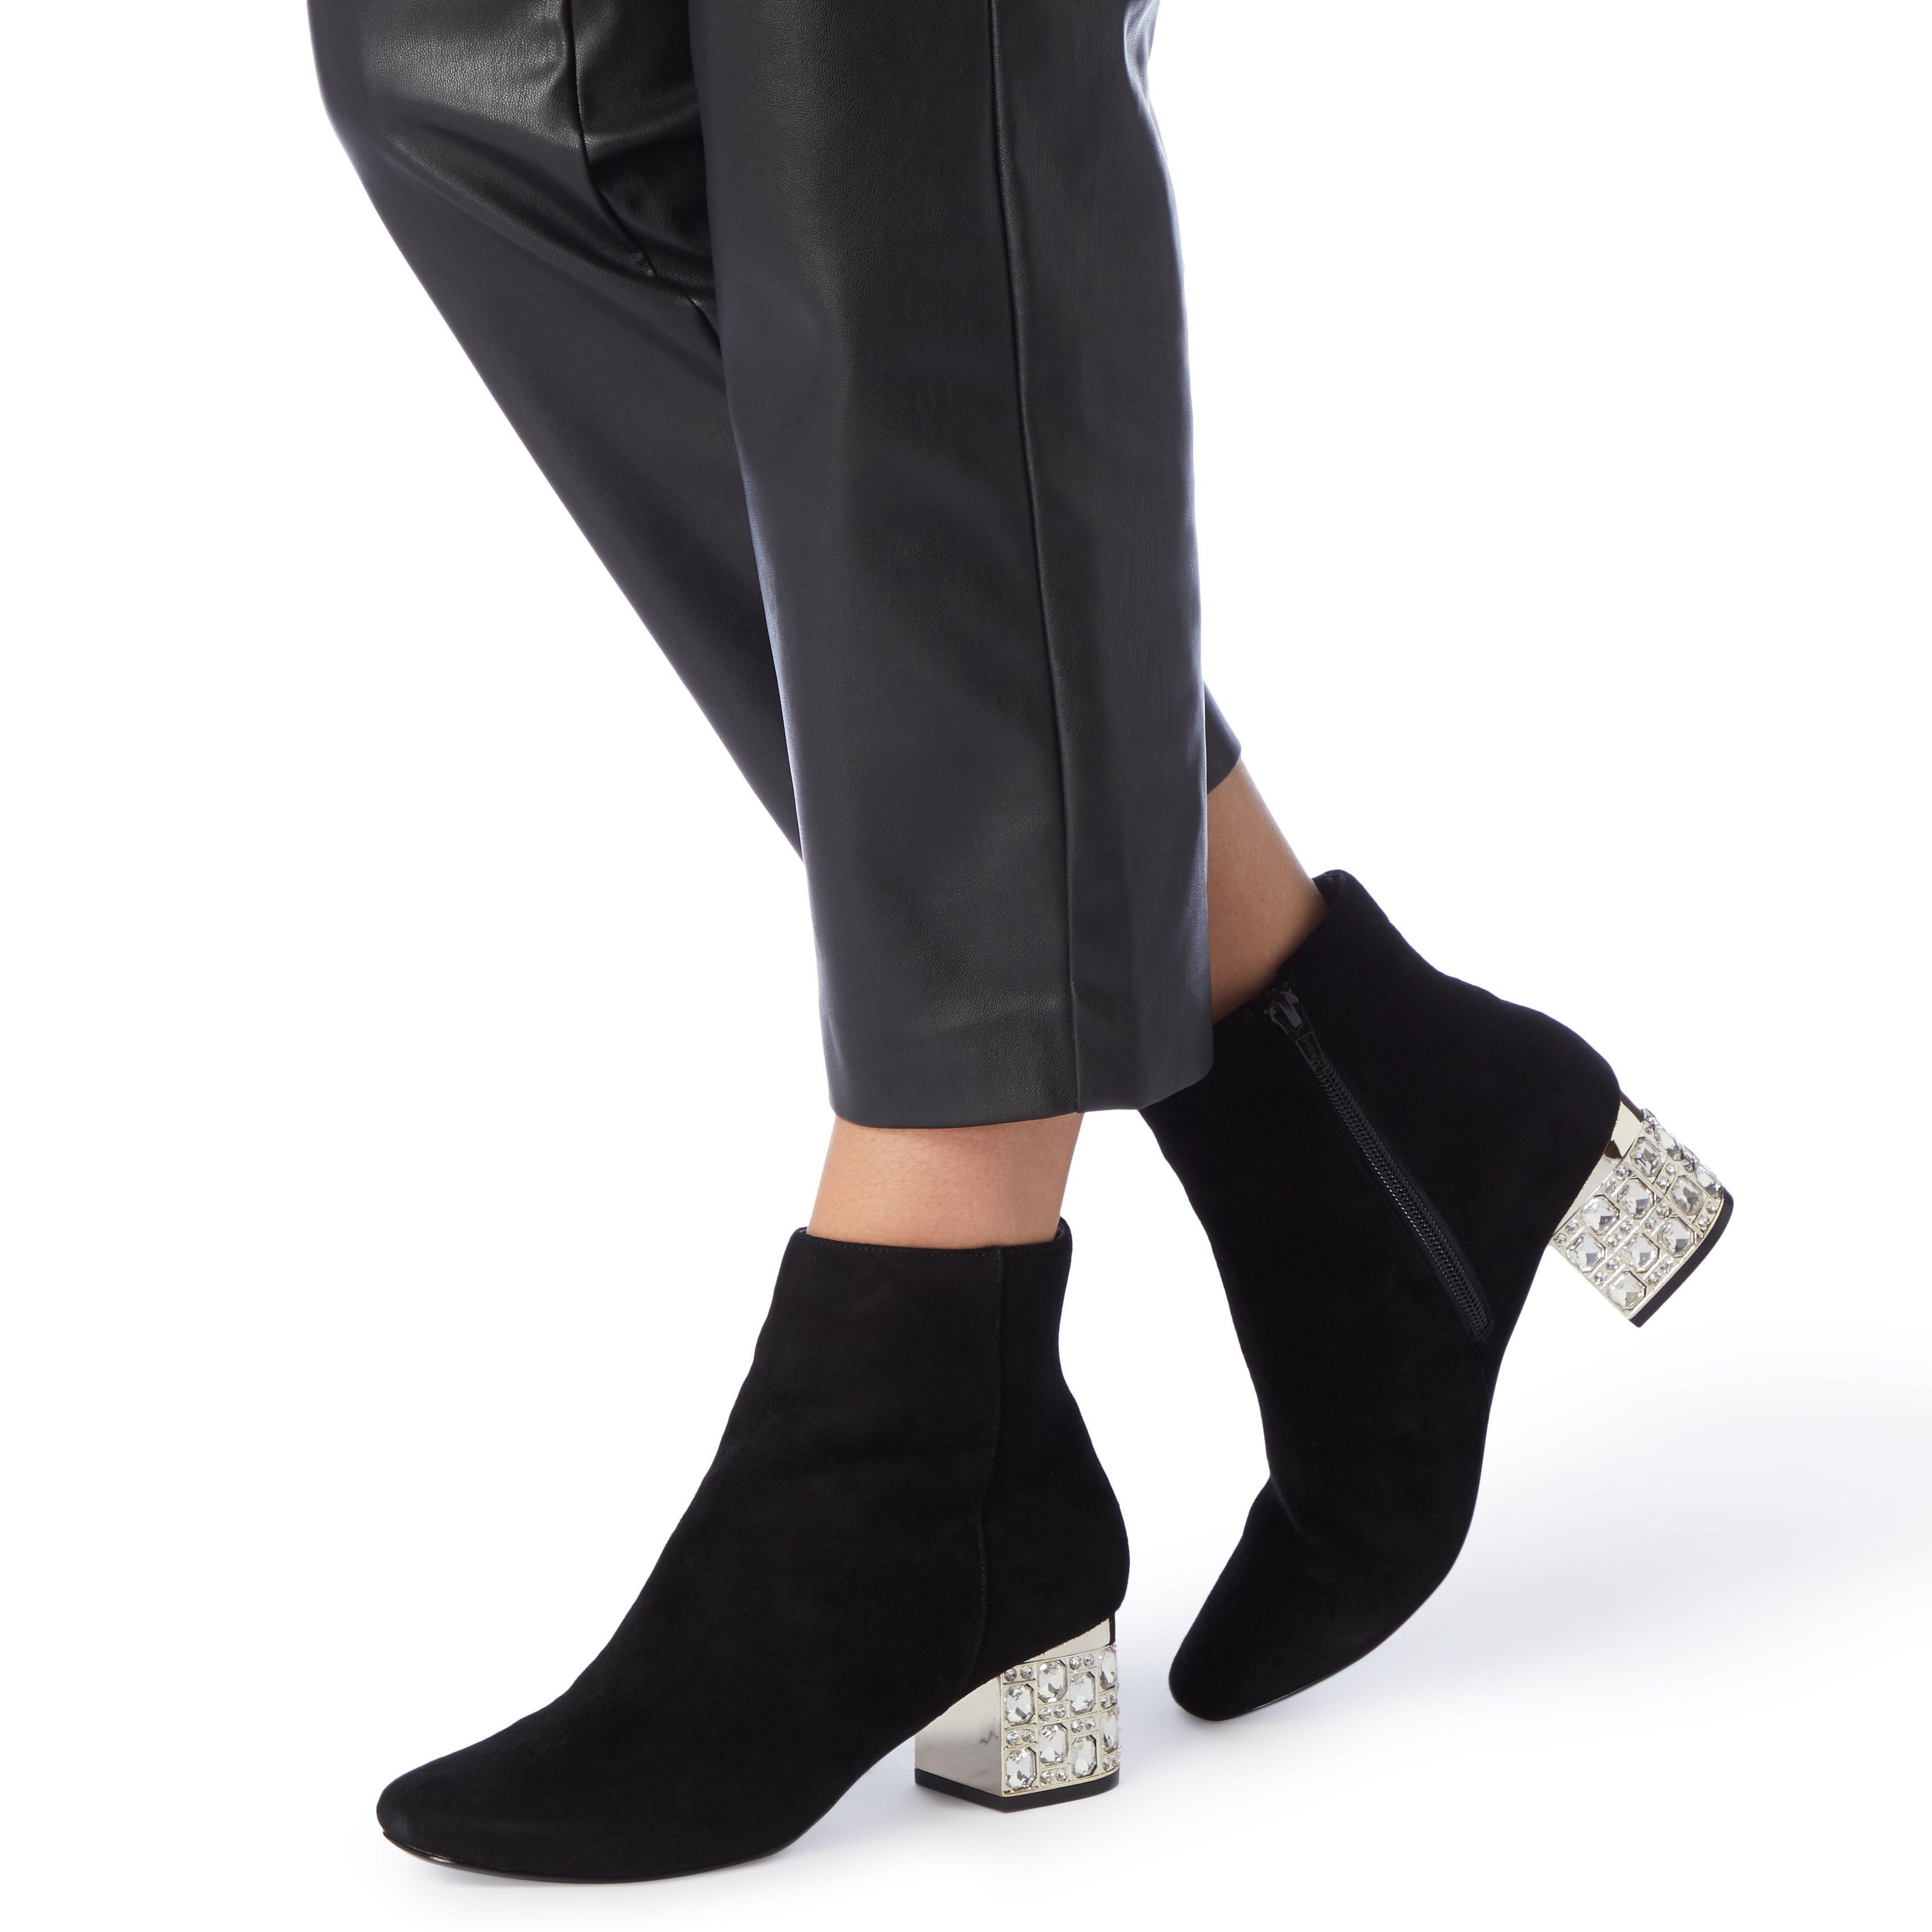 The Orriana boot by Dune London is a staple style for your everyday looks. Made from leather, it features a round toe and a high block heel. Secured with a zip fastening, it's accented with chic buckle detailing.